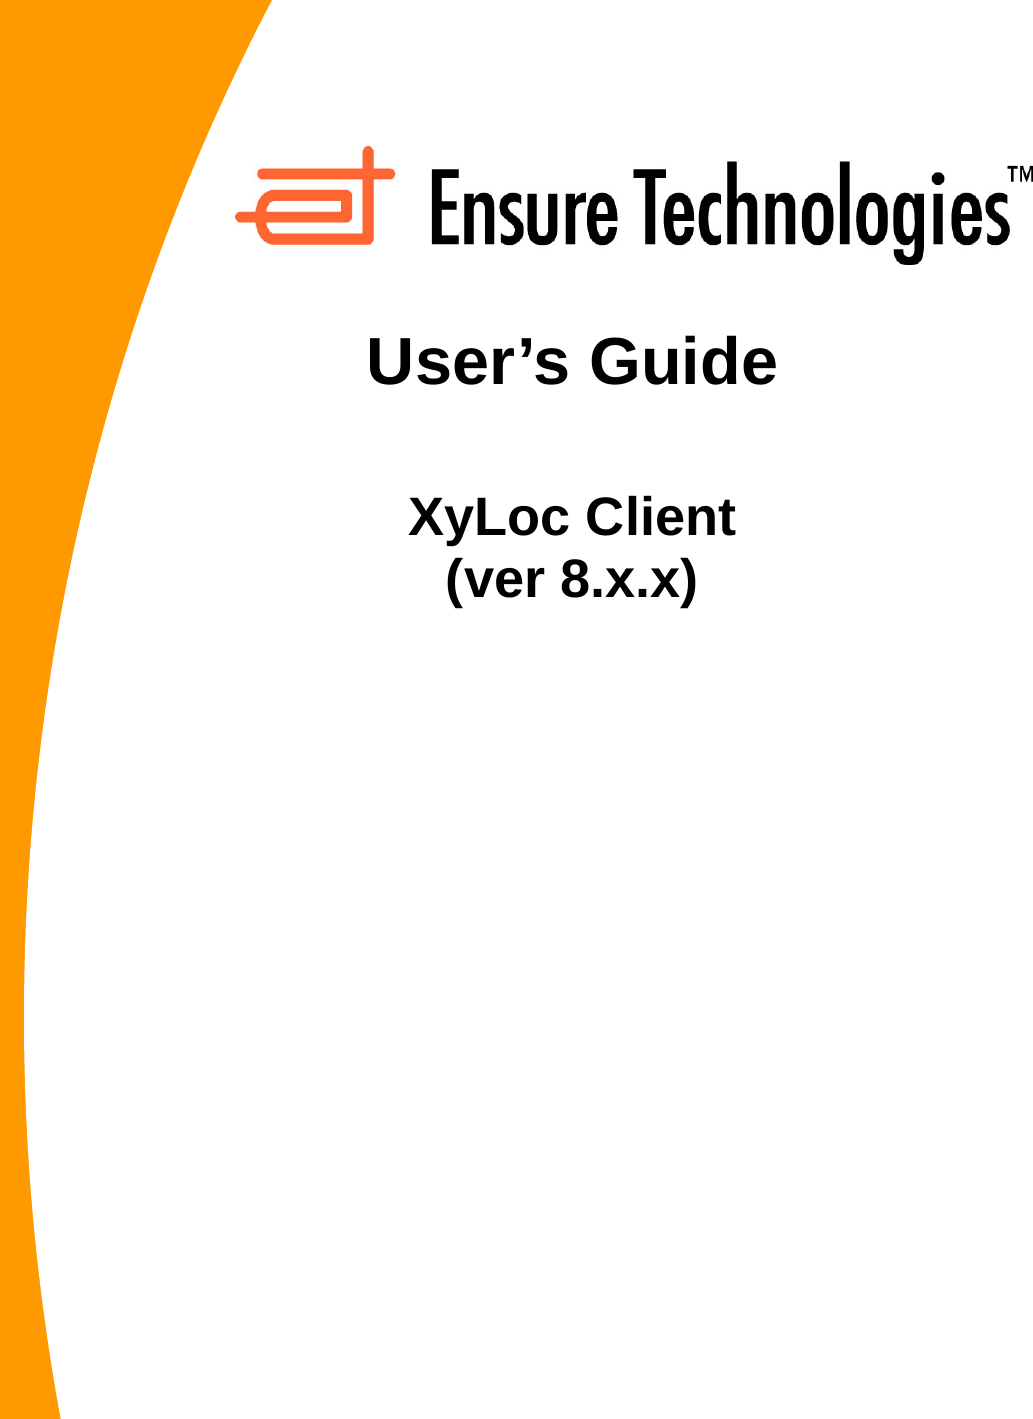    User’s Guide  XyLoc Client (ver 8.x.x)                               